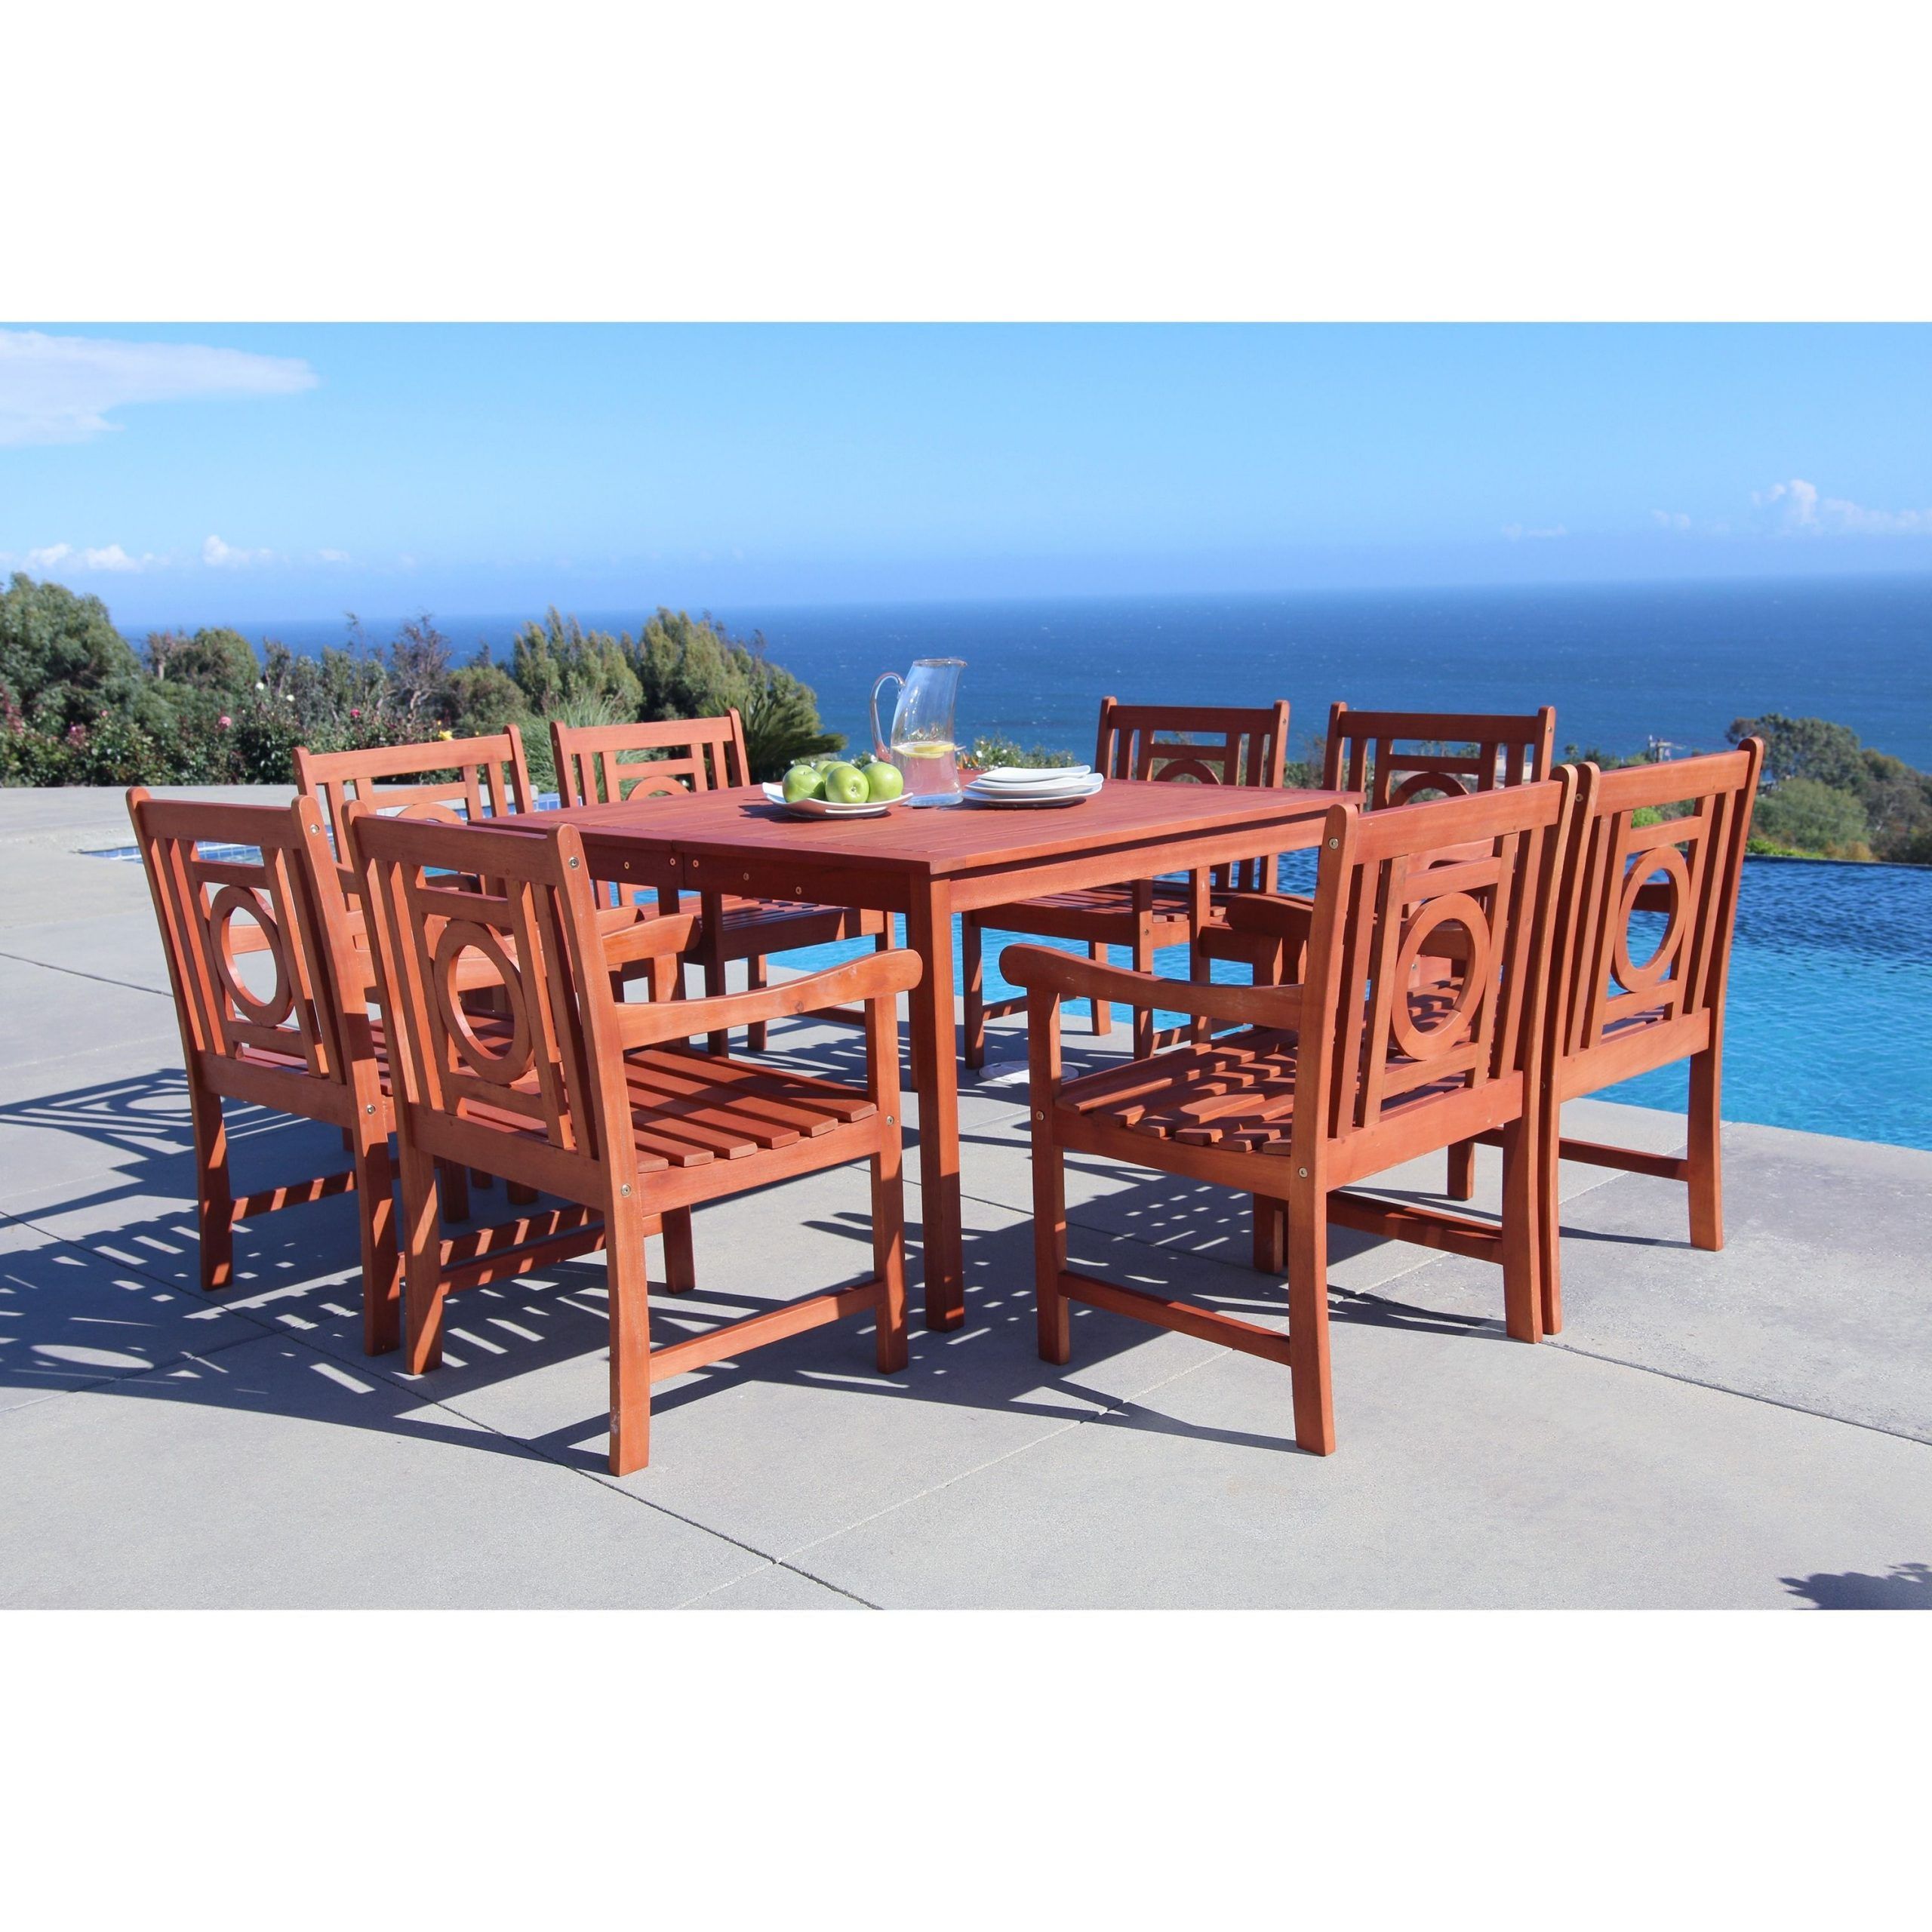 Malibu Eco Friendly 9 Piece Outdoor Hardwood Dining Set With Square Intended For 9 Piece Patio Dining Sets (View 3 of 15)